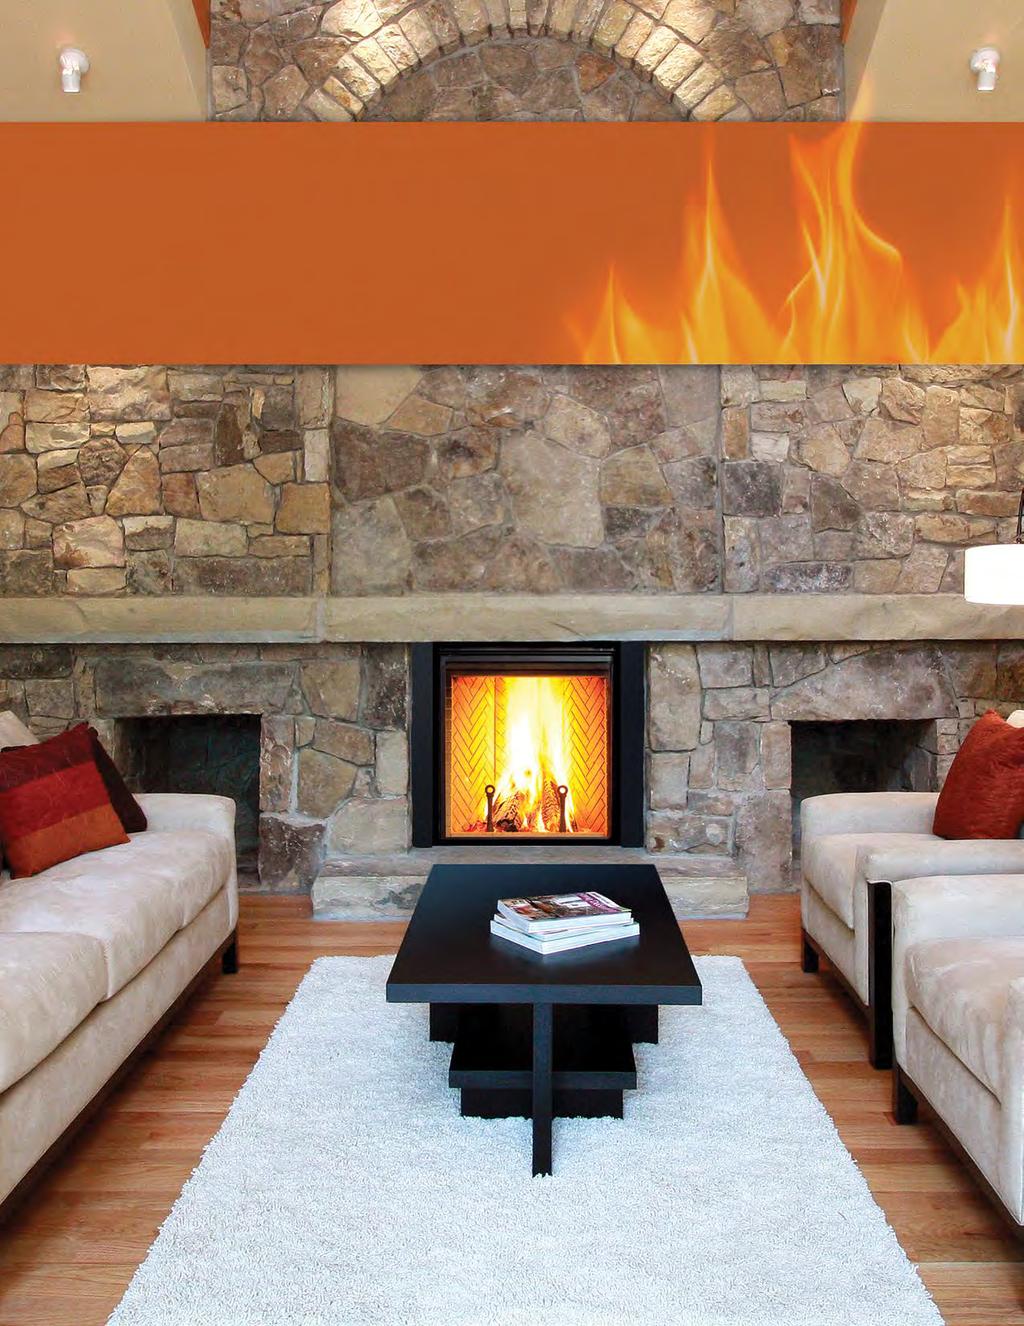 Rumford 1000 The Renaissance Rumford 1000 is the ideal wood-burning fireplace.